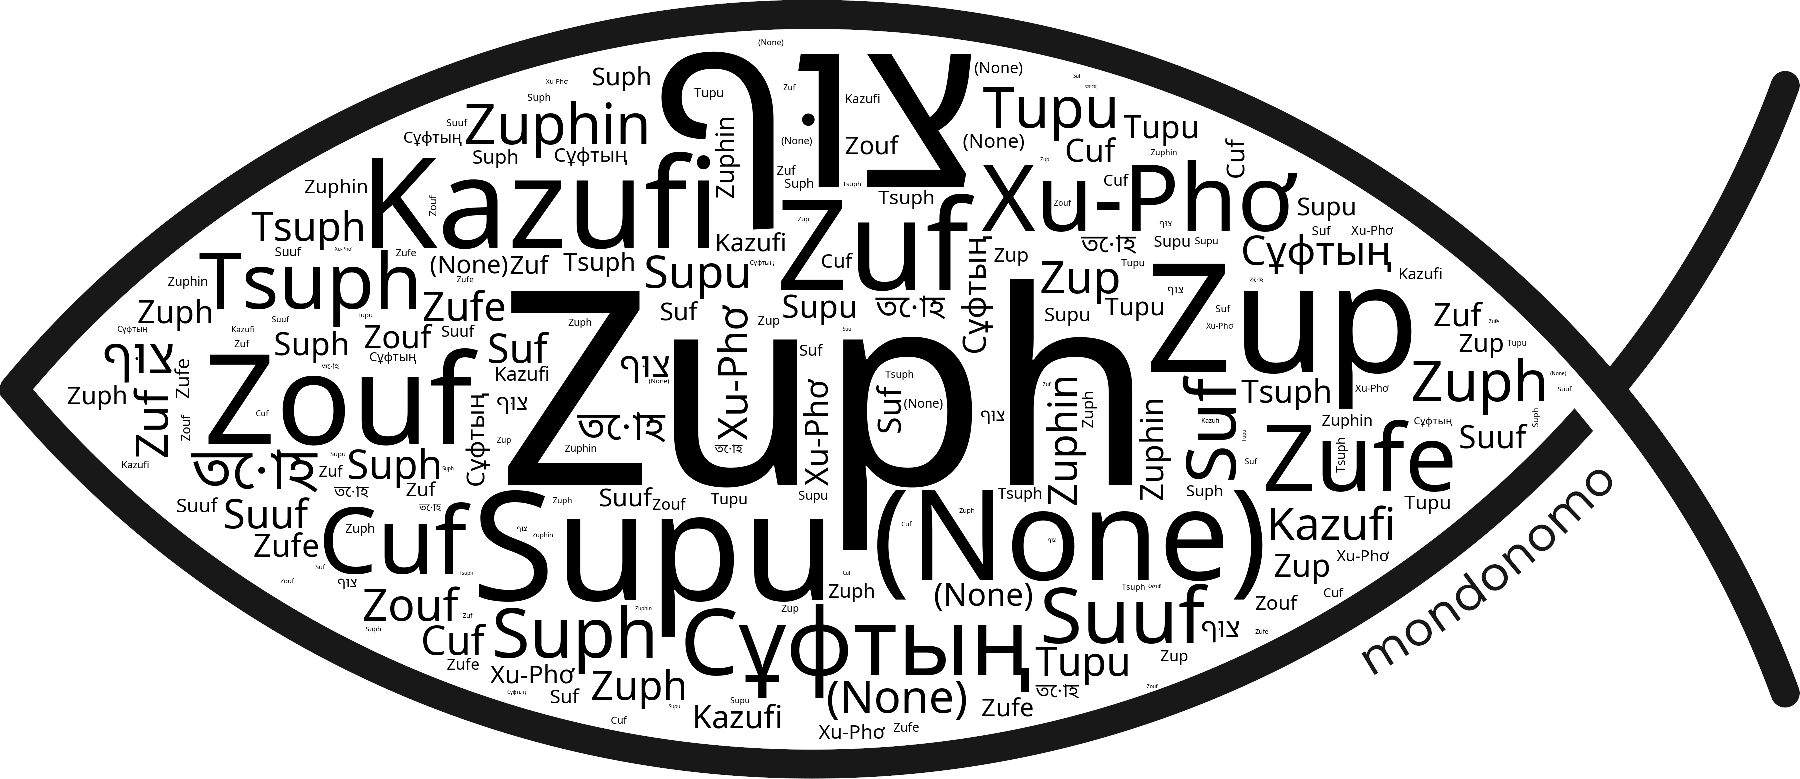 Name Zuph in the world's Bibles